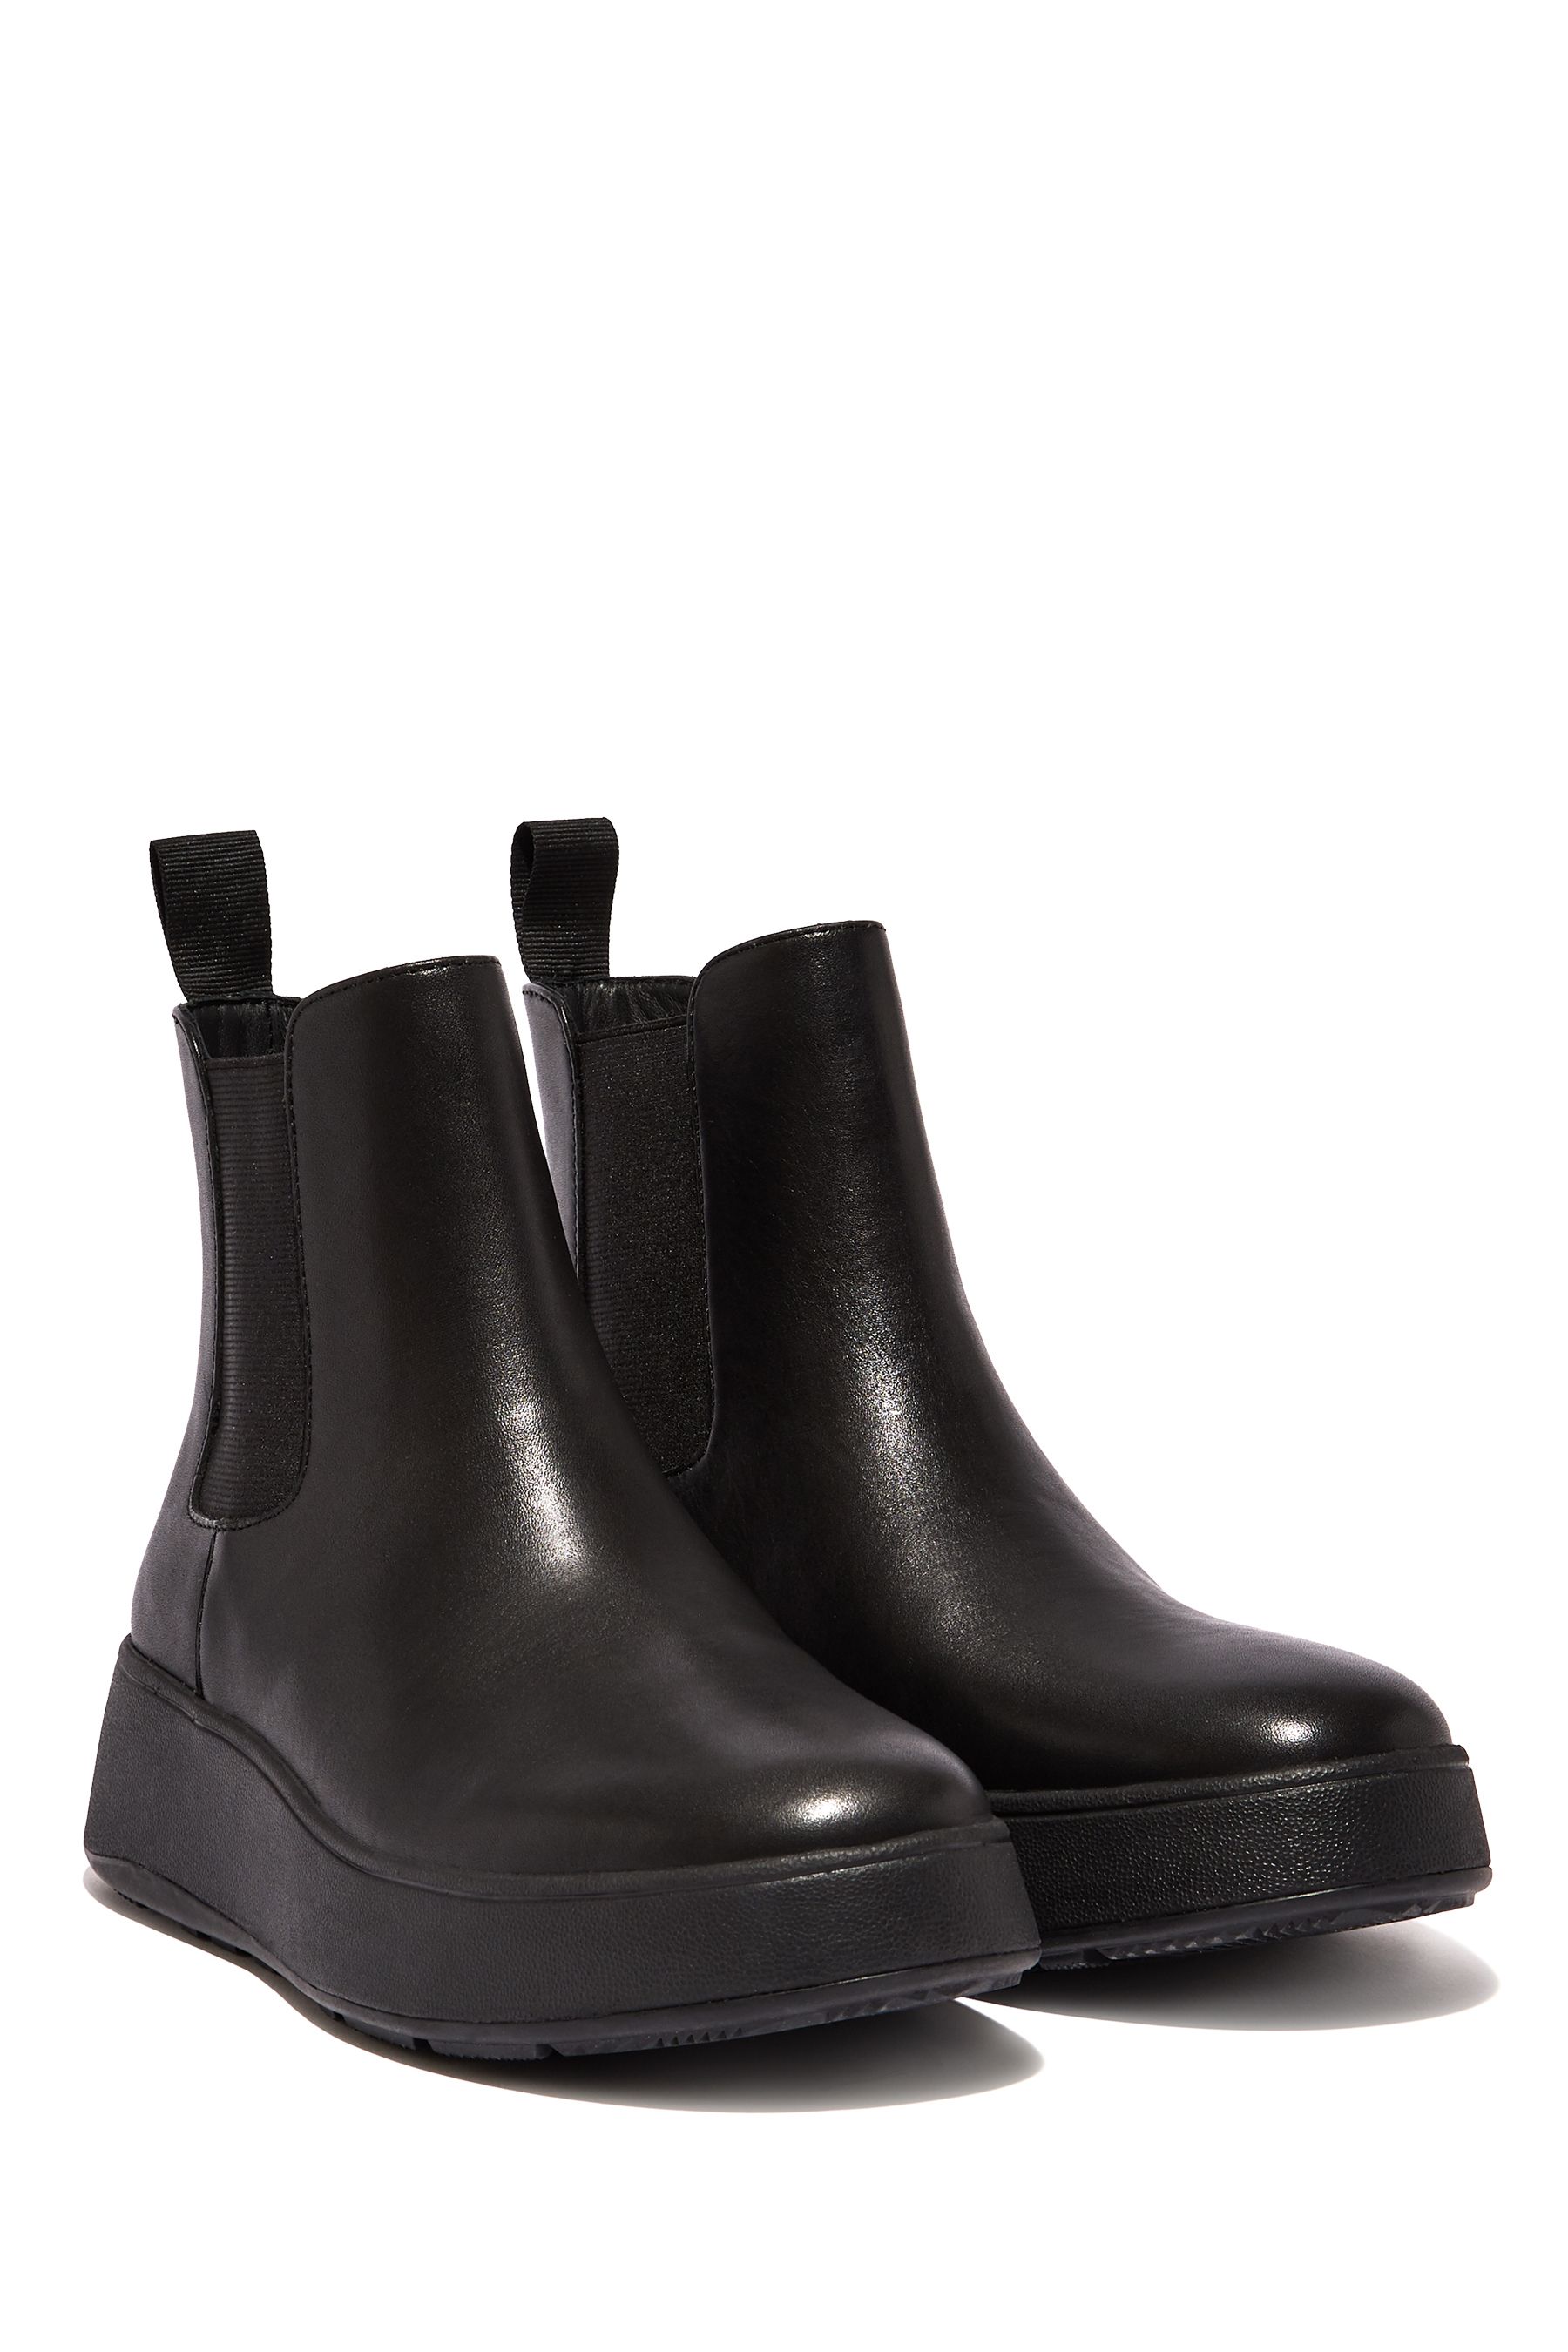 Buy FitFlop F Mode Leather Flatform Chelsea Boots from the Next UK ...